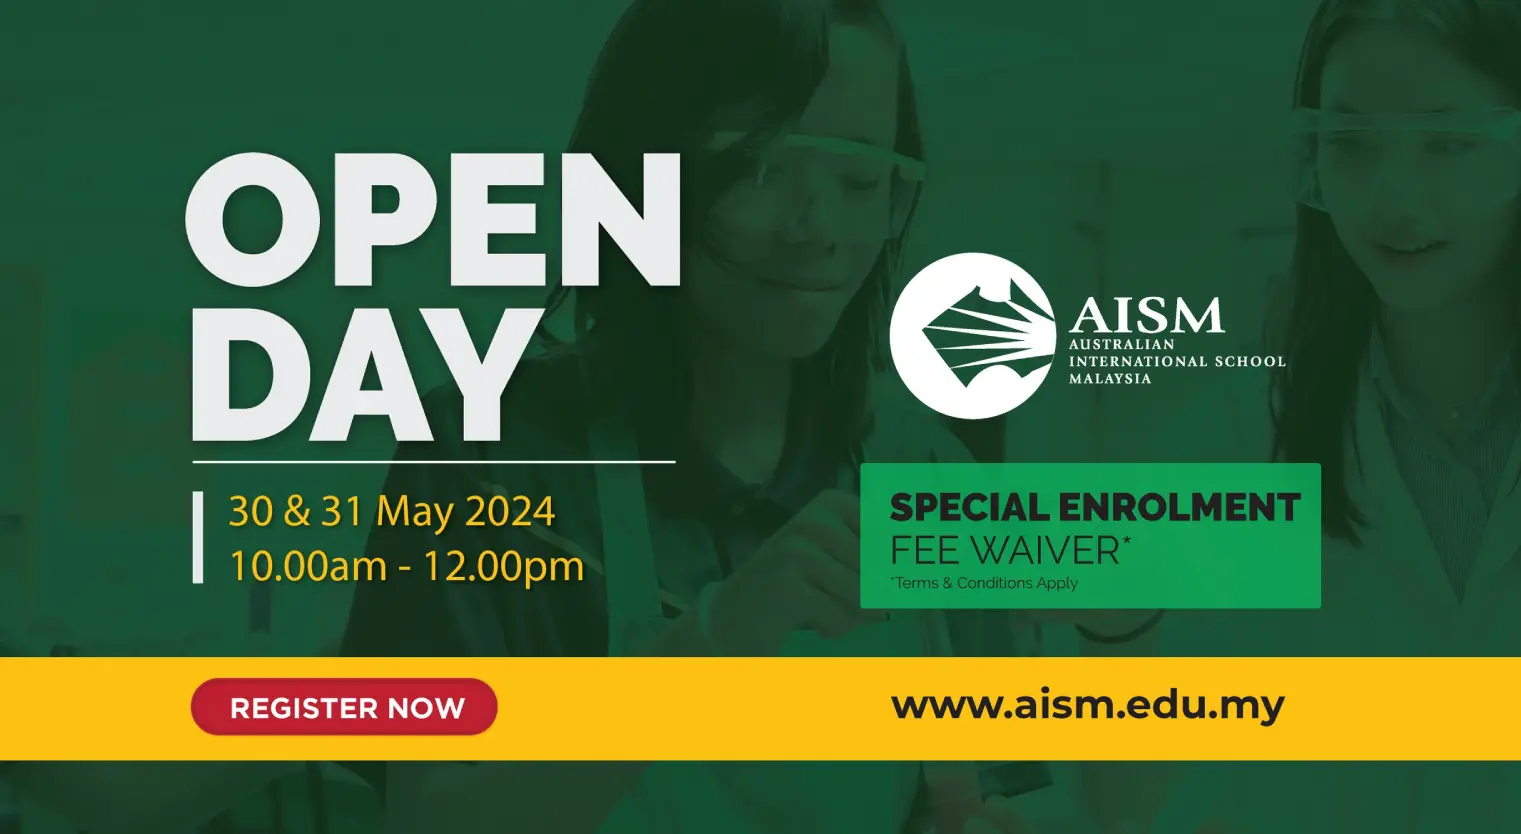 aism-open-day-30-31-may-2024